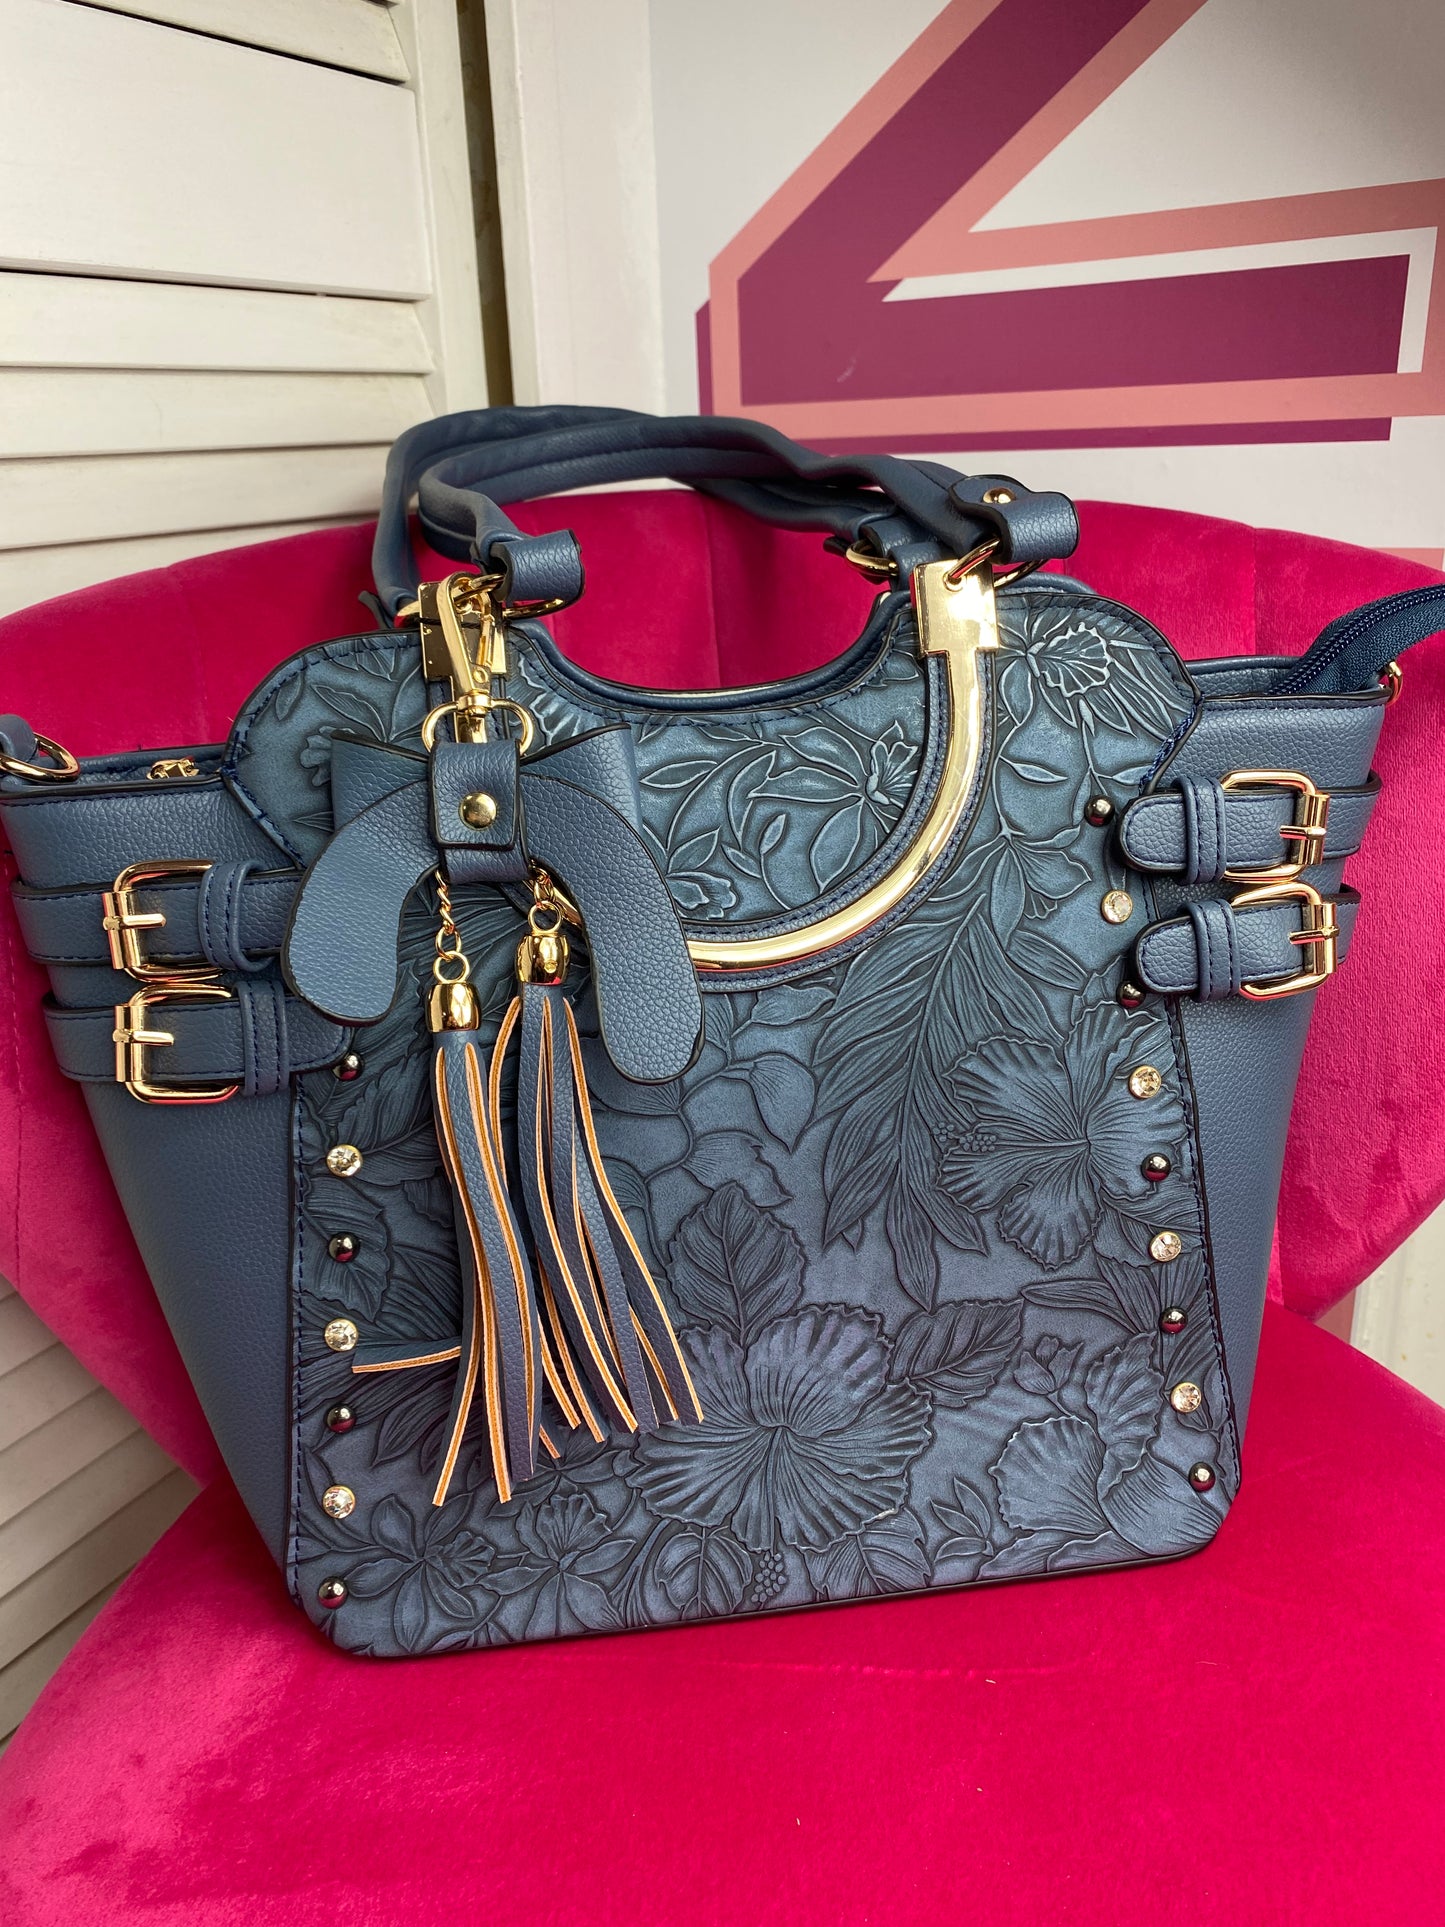 Full Size Floral Buckle Accent Embellished Vegan Leather Satchel Purse Shoulder Bag (4 Colours) with Detachable Crossbody Strap and Removable Bow Keychain